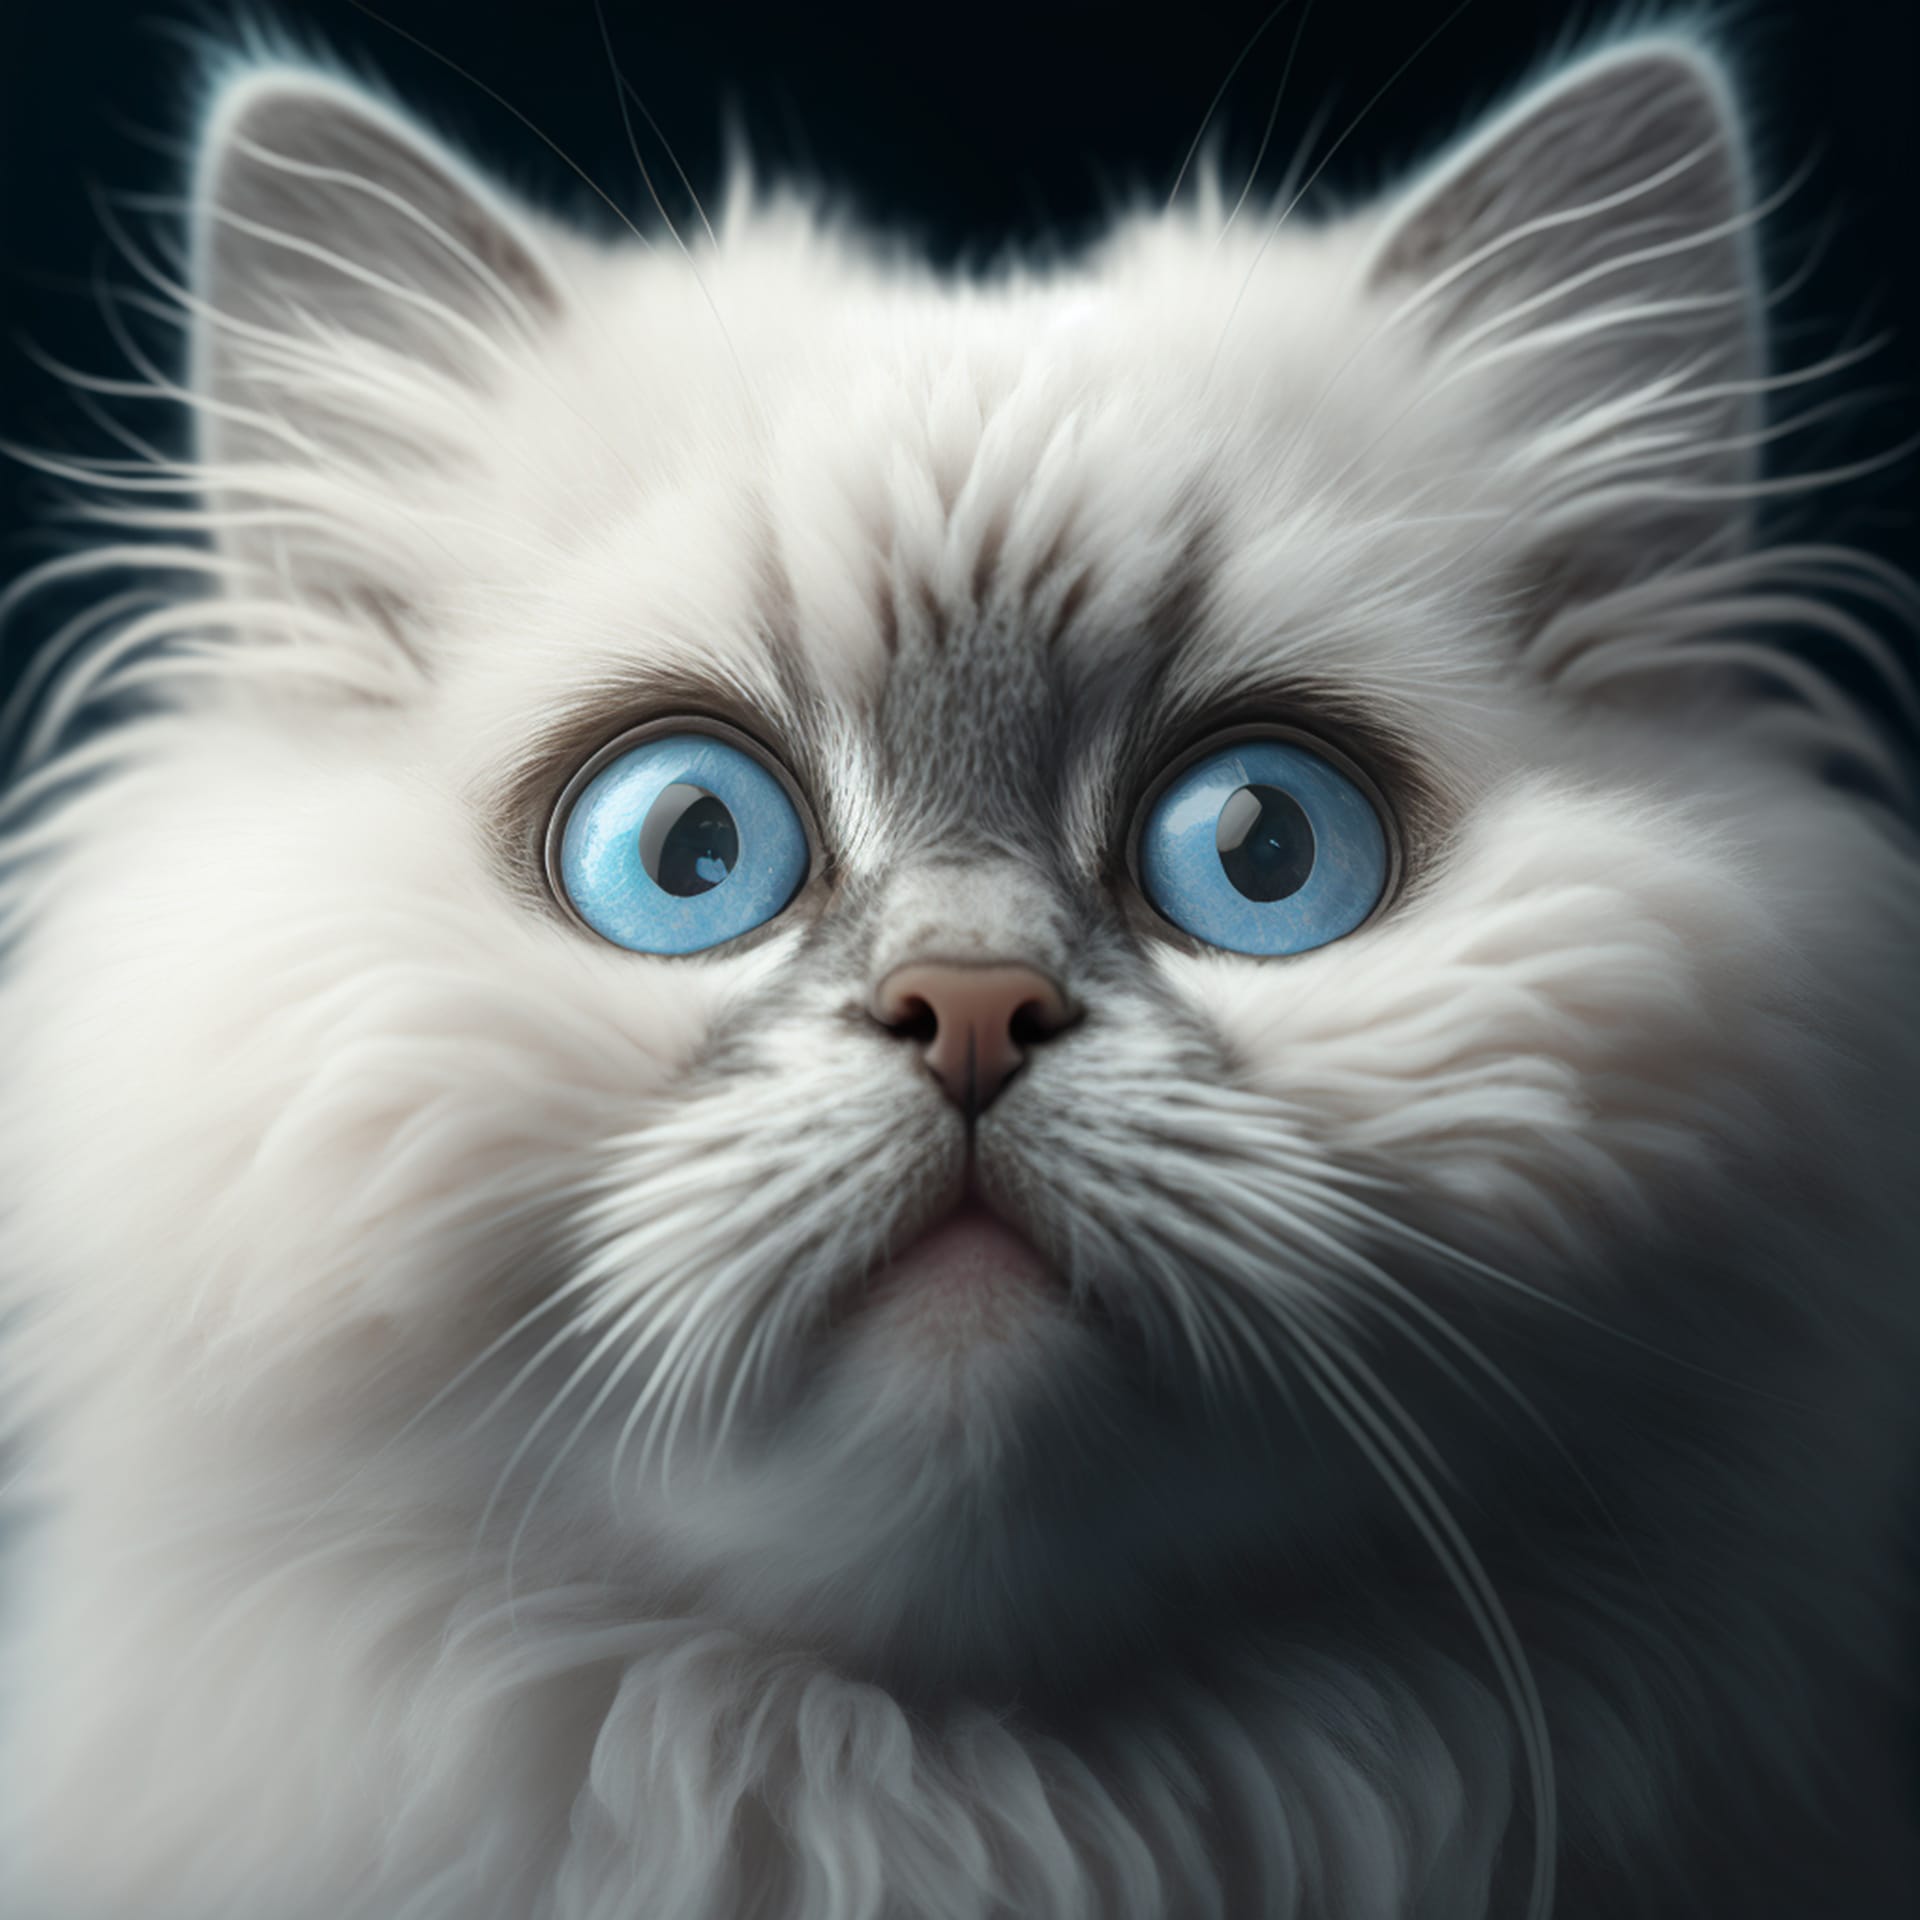 Fluffy cat with blue eyes seems be closed